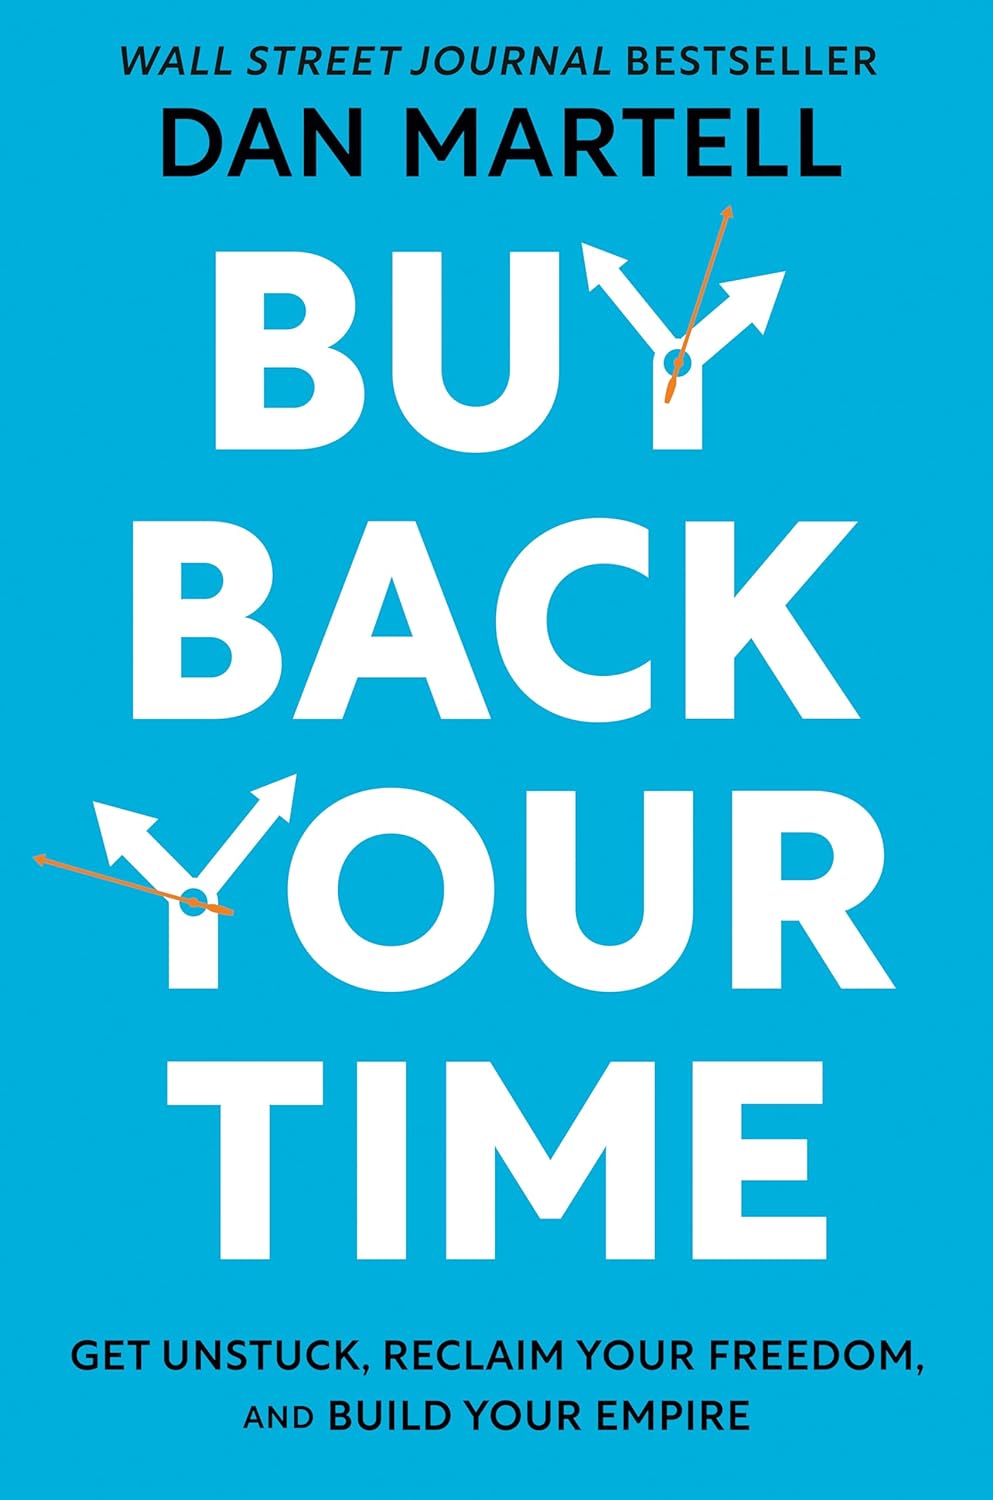 Book cover "Buy Back Your Time" by Dan Martell